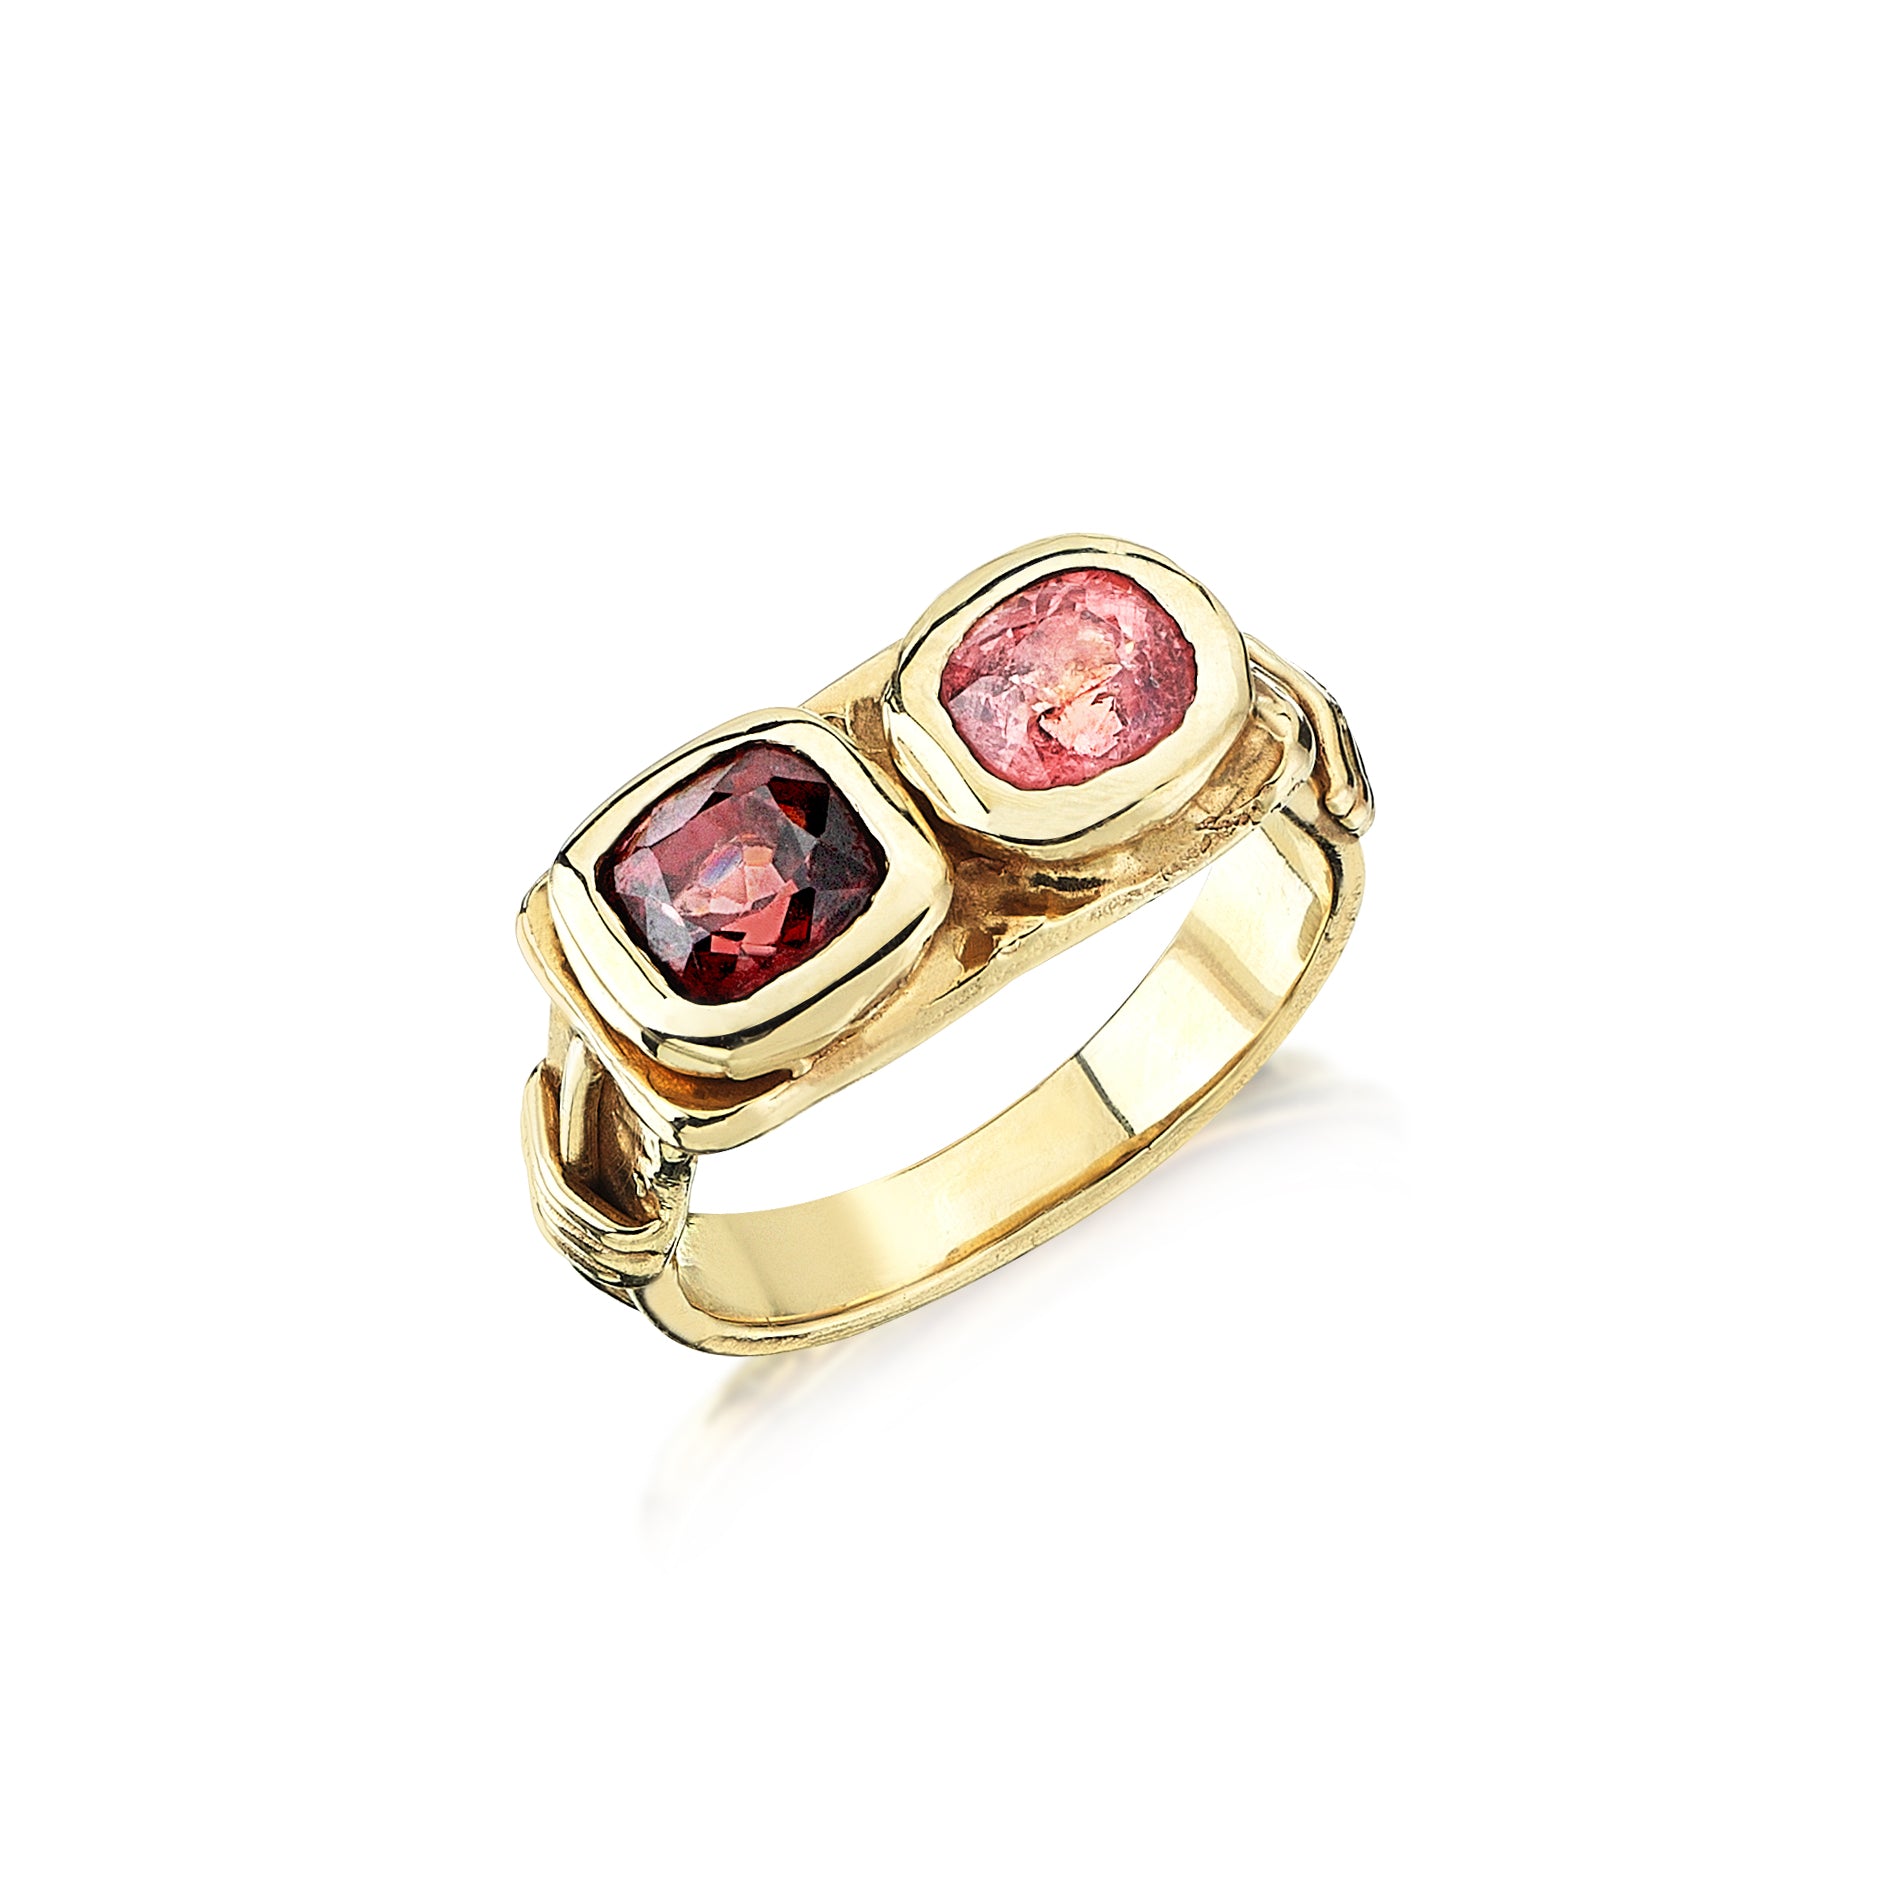 The Spinel Ring